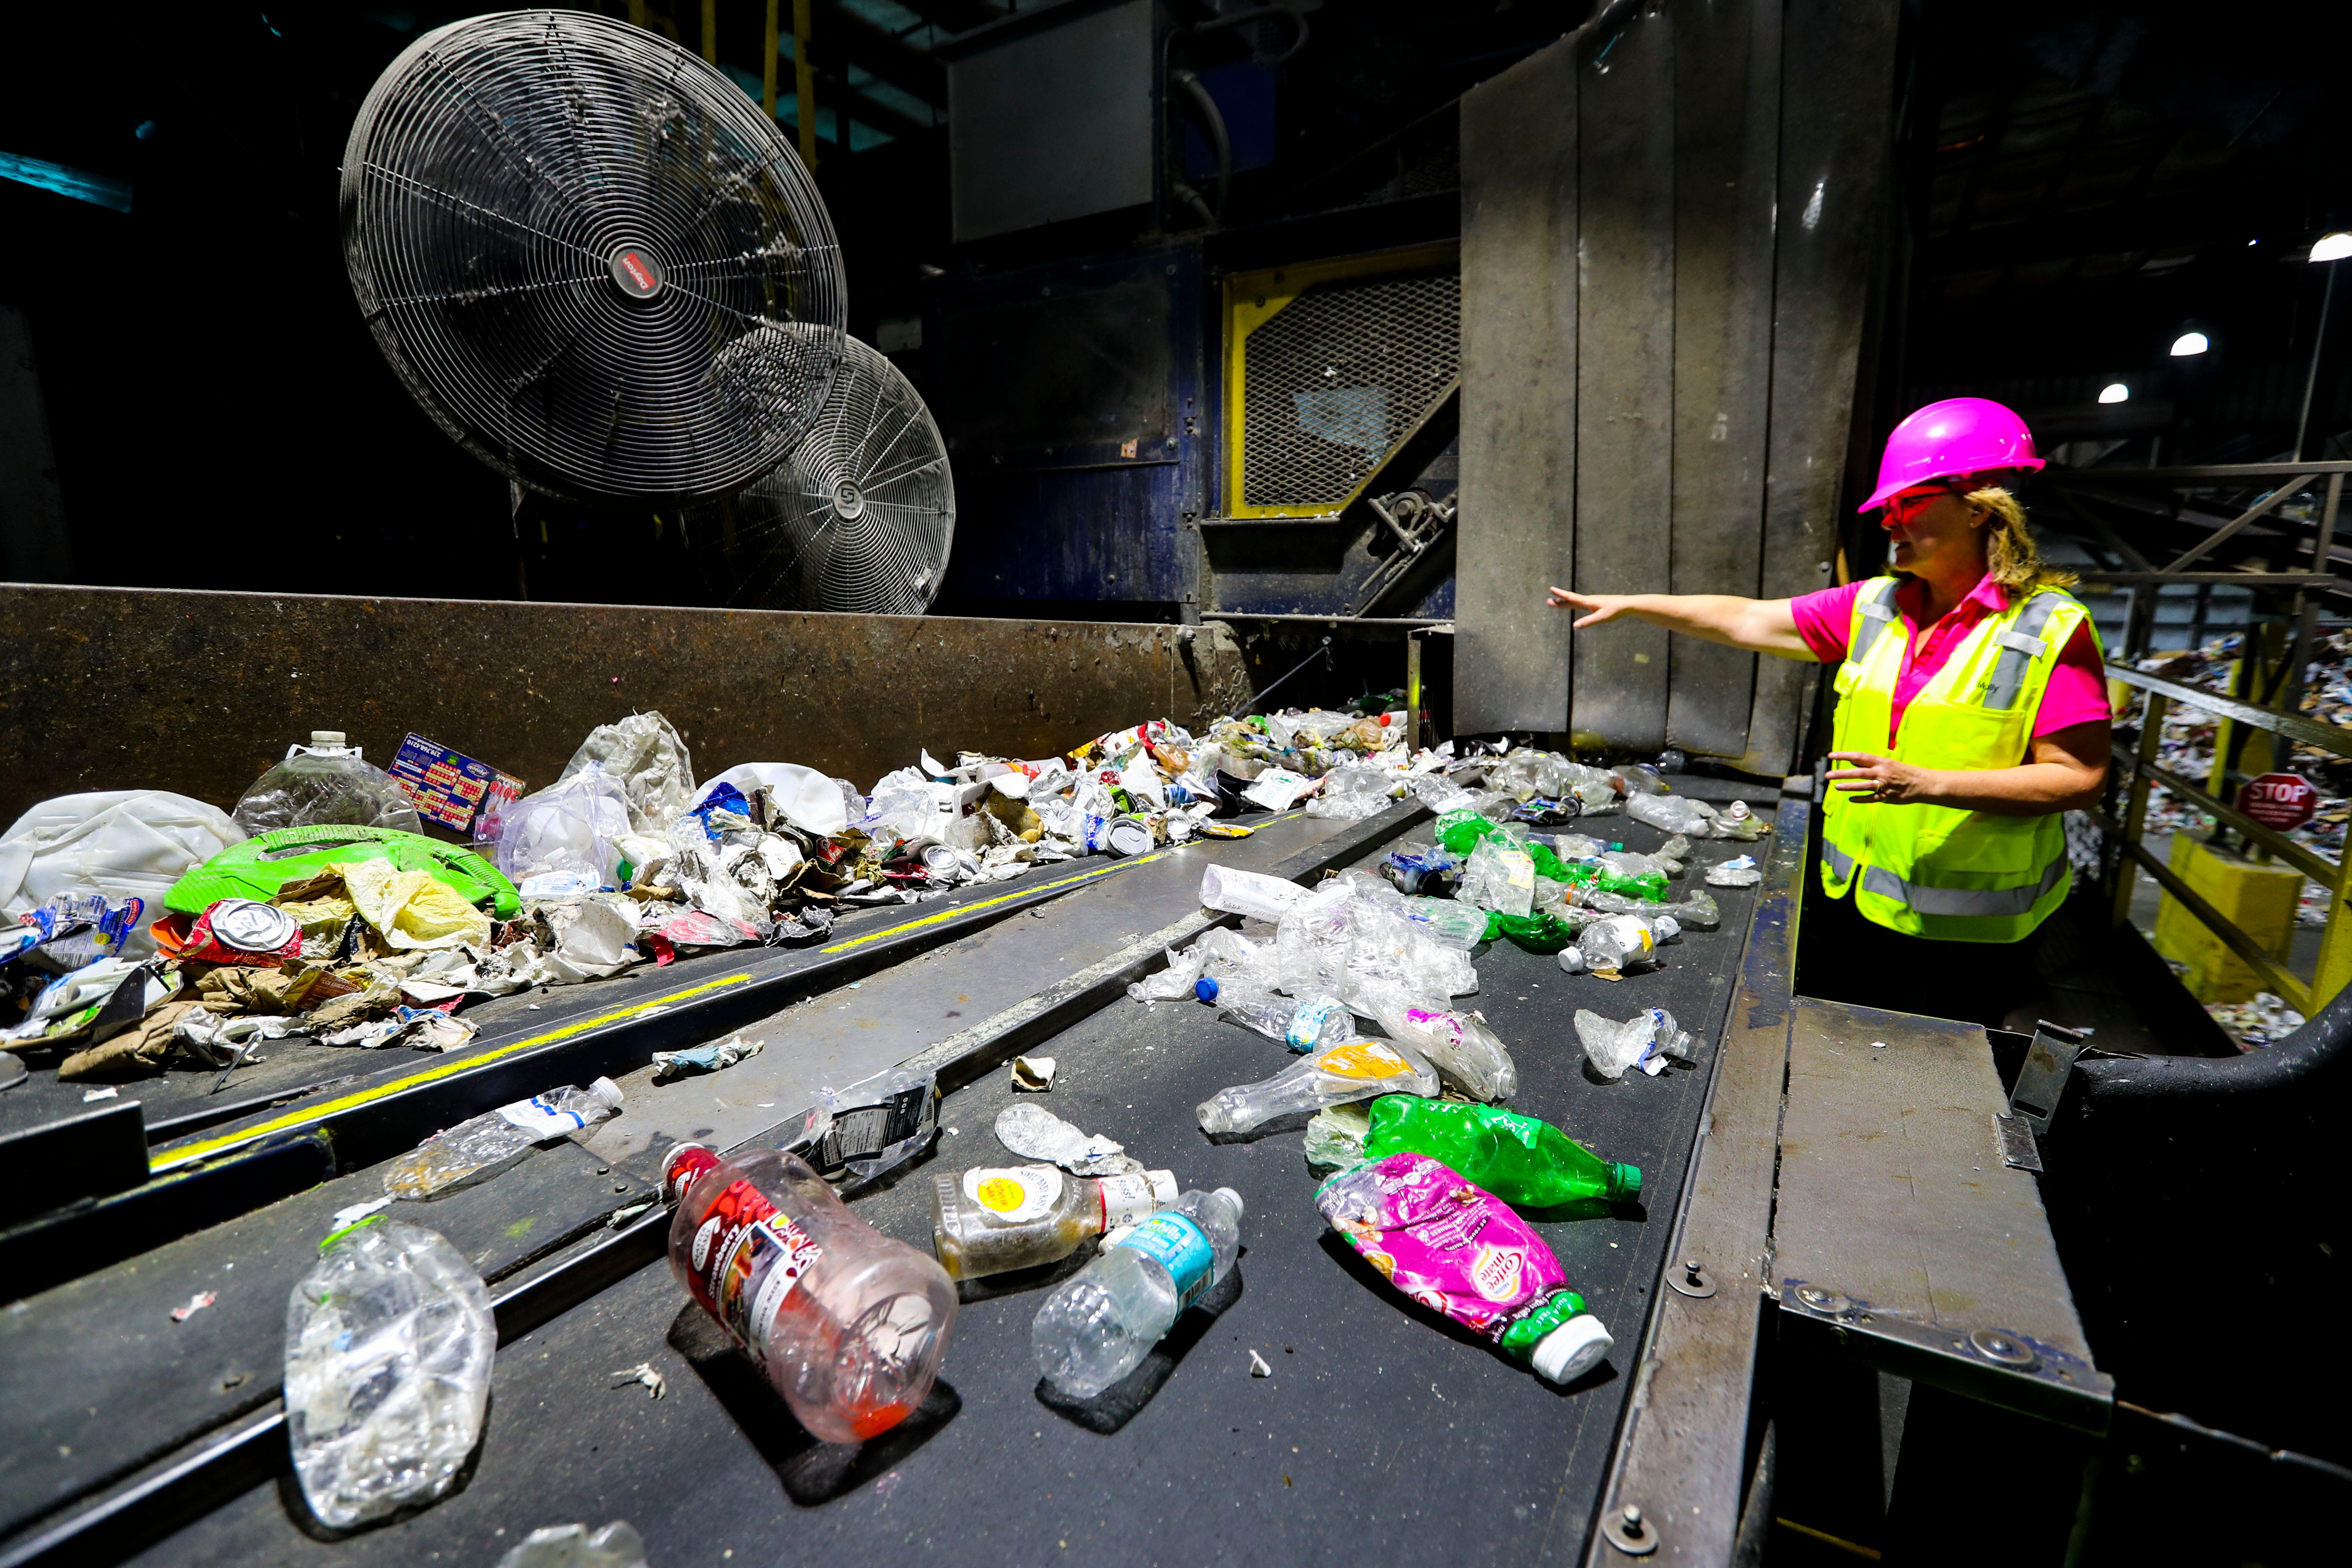 Dirty rumors: Myths and misconceptions about Lee County's recycling program  cut into potential profits